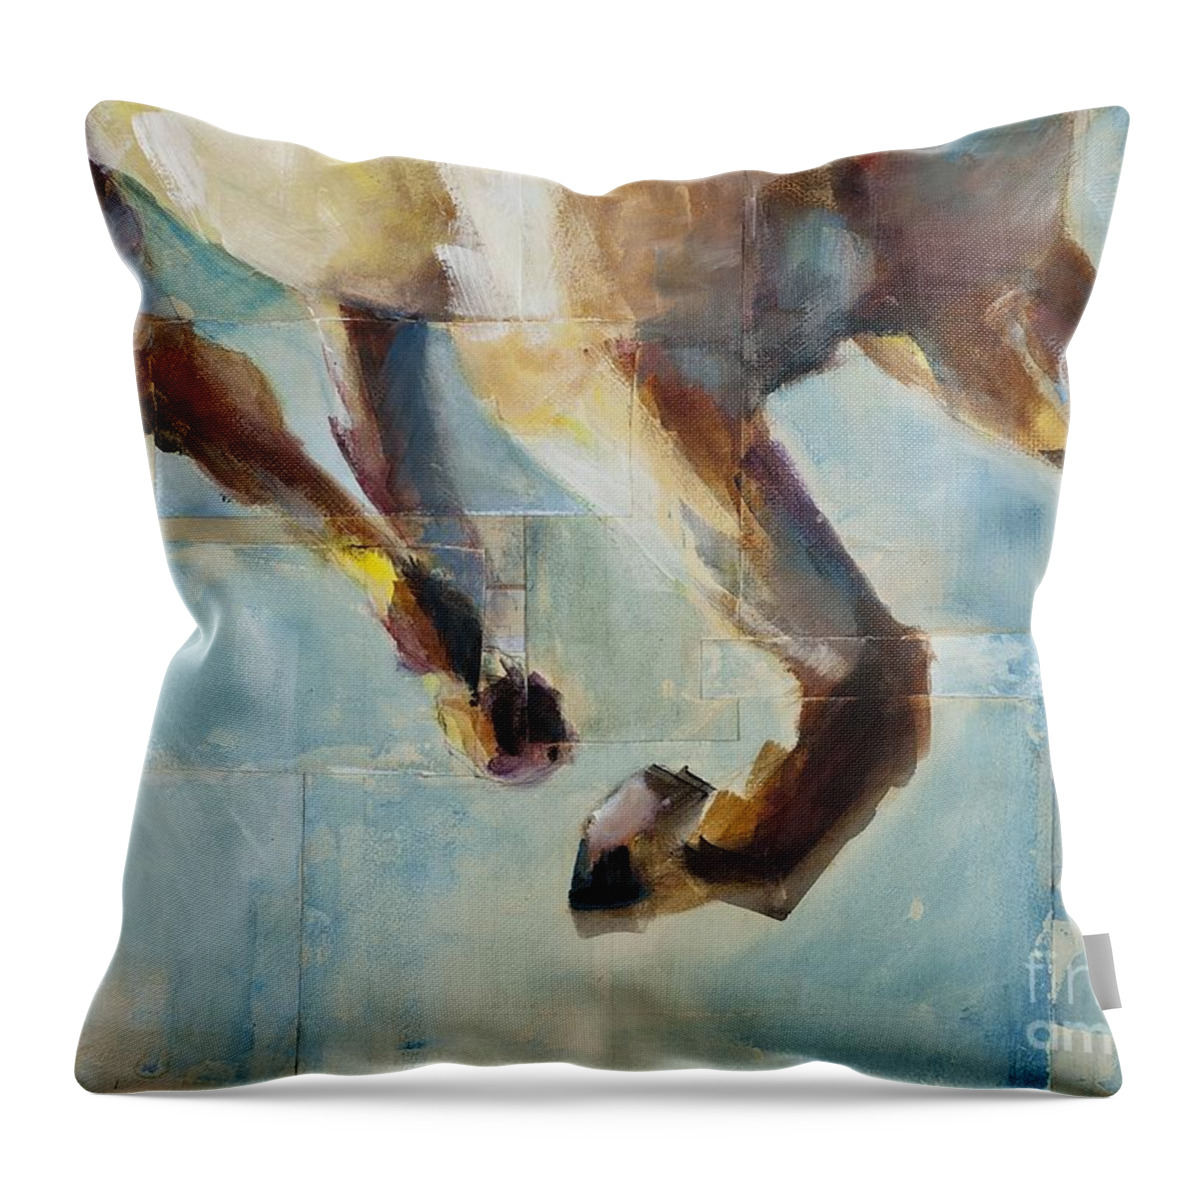 Horses Throw Pillow featuring the painting Ride Like You Stole It by Frances Marino